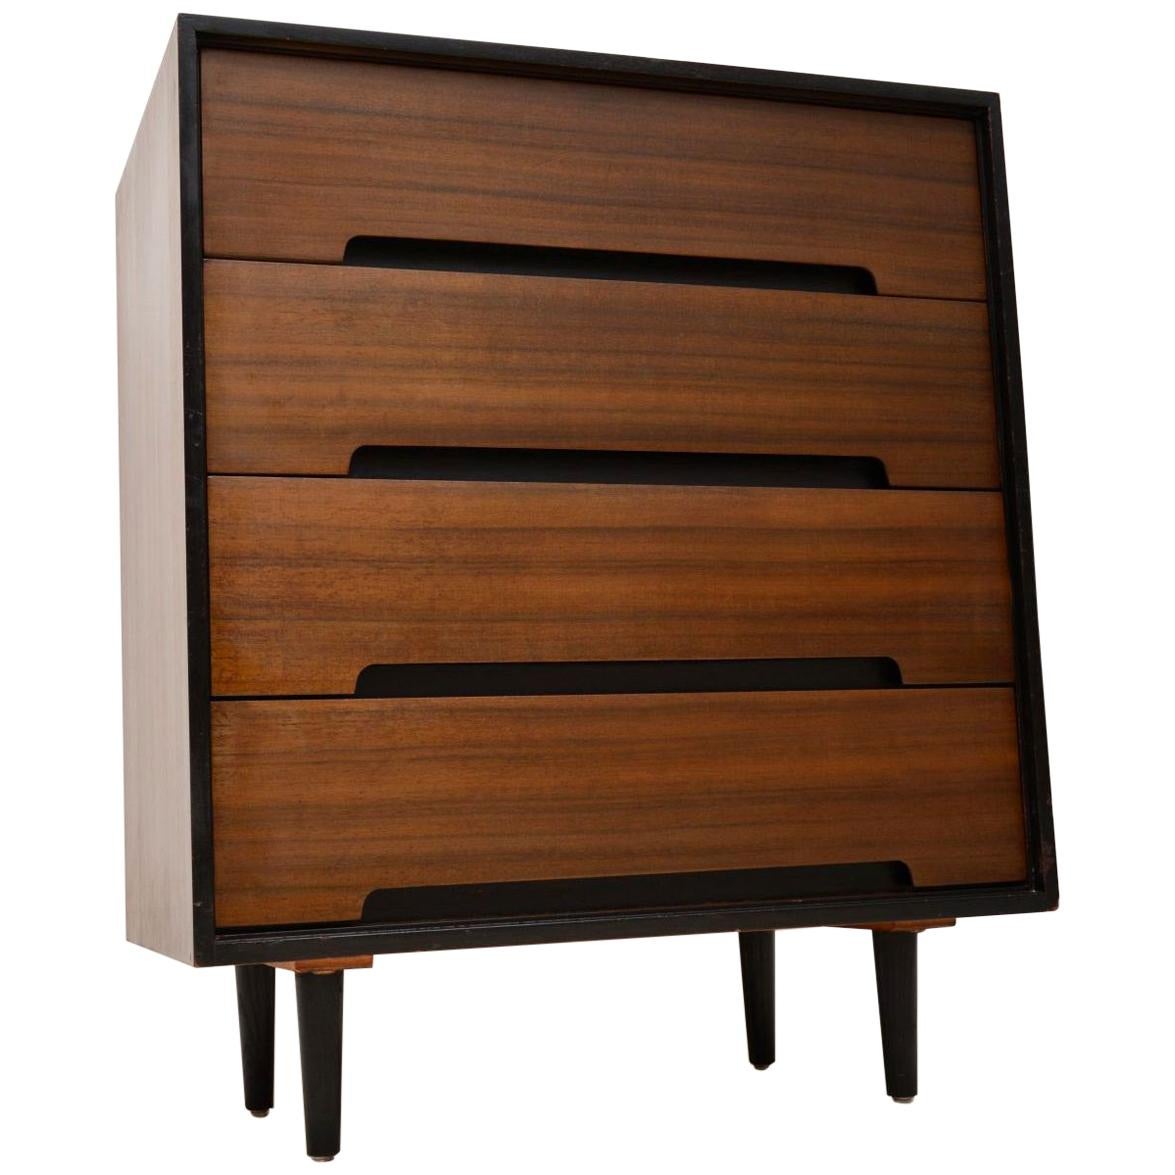 1950s Vintage Walnut Chest of Drawers by John & Sylvia Reid for Stag C Range